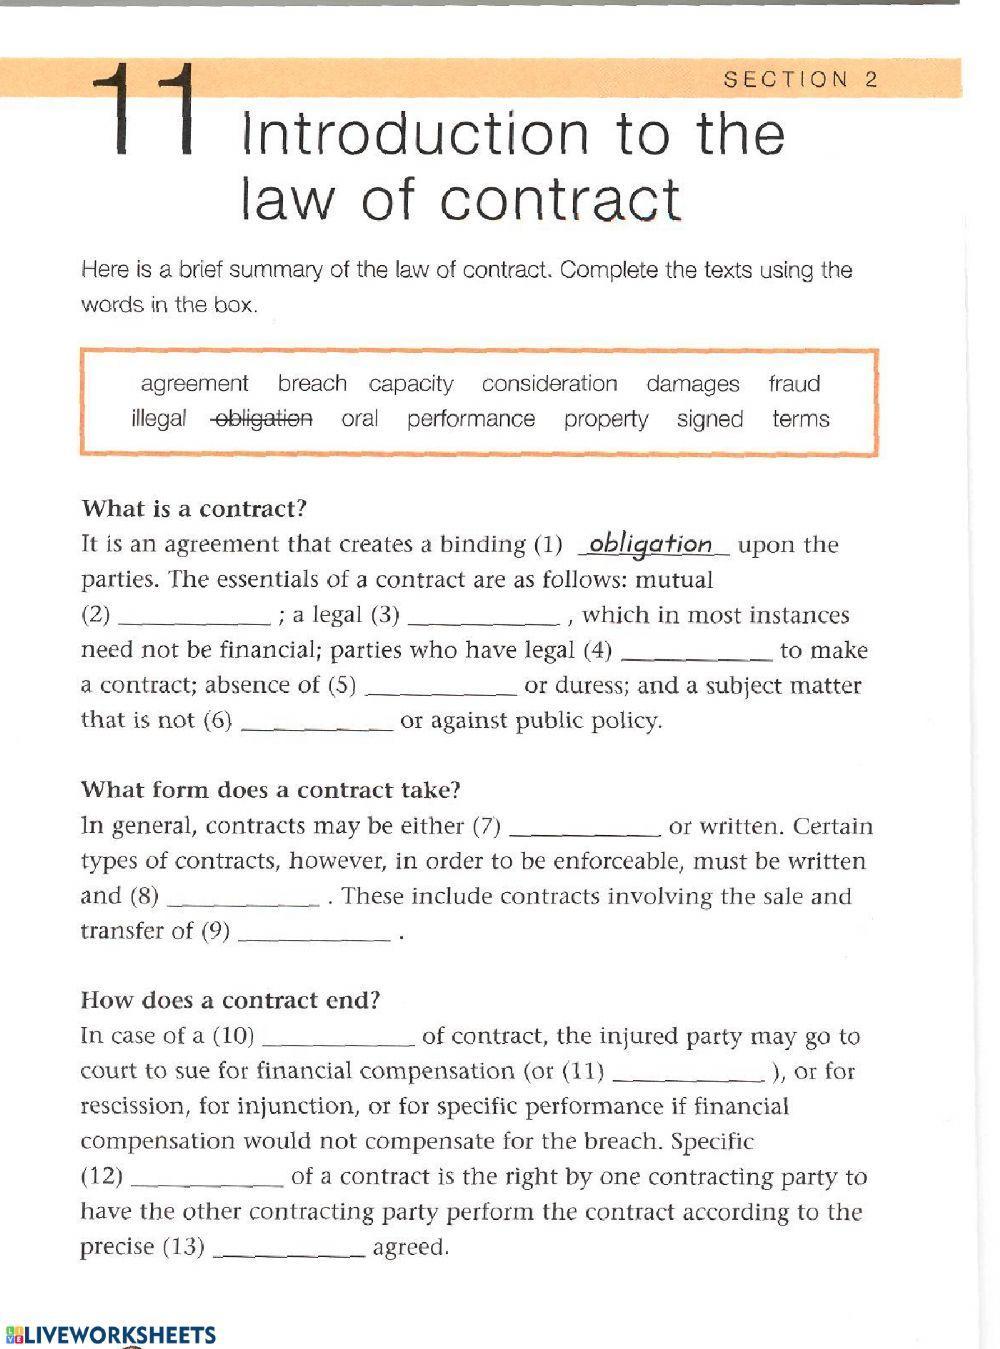 Introduction to the law of contracts